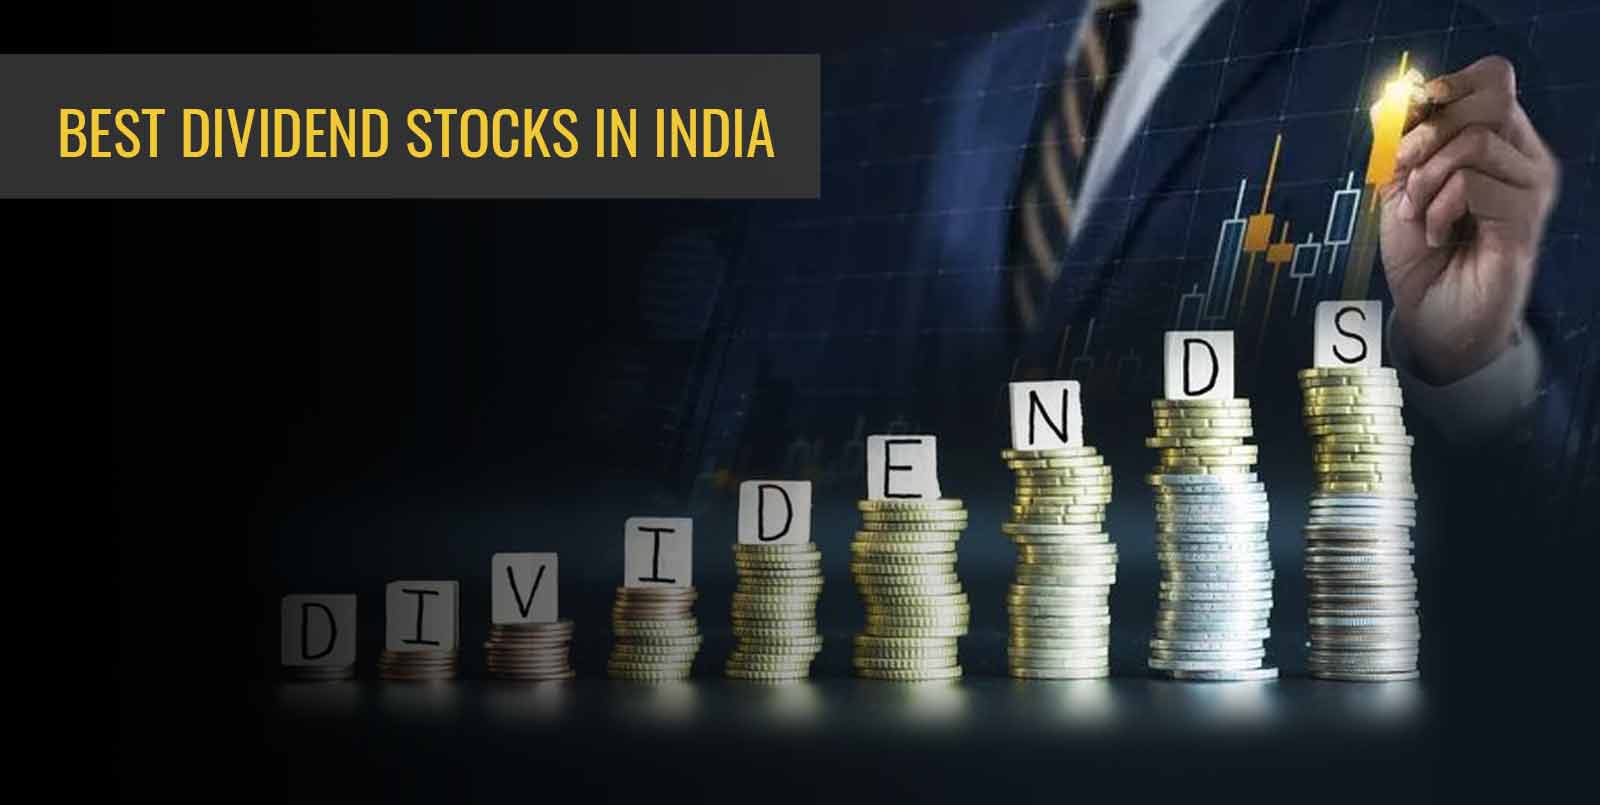 Best Dividend Stocks in India